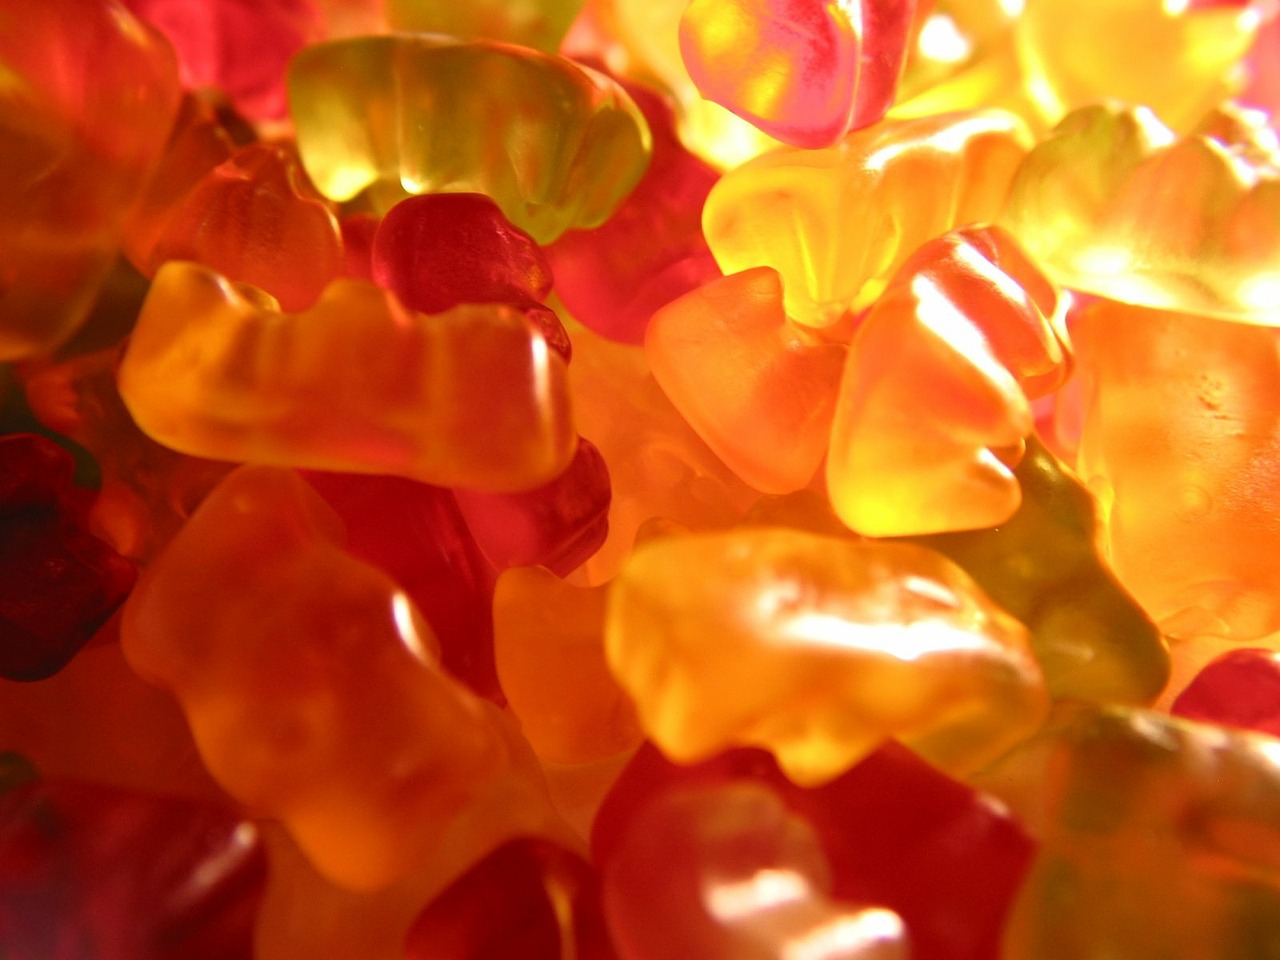 gummibärchen,candy,jelly,colorful,free pictures, free photos, free images, royalty free, free illustrations, public domain